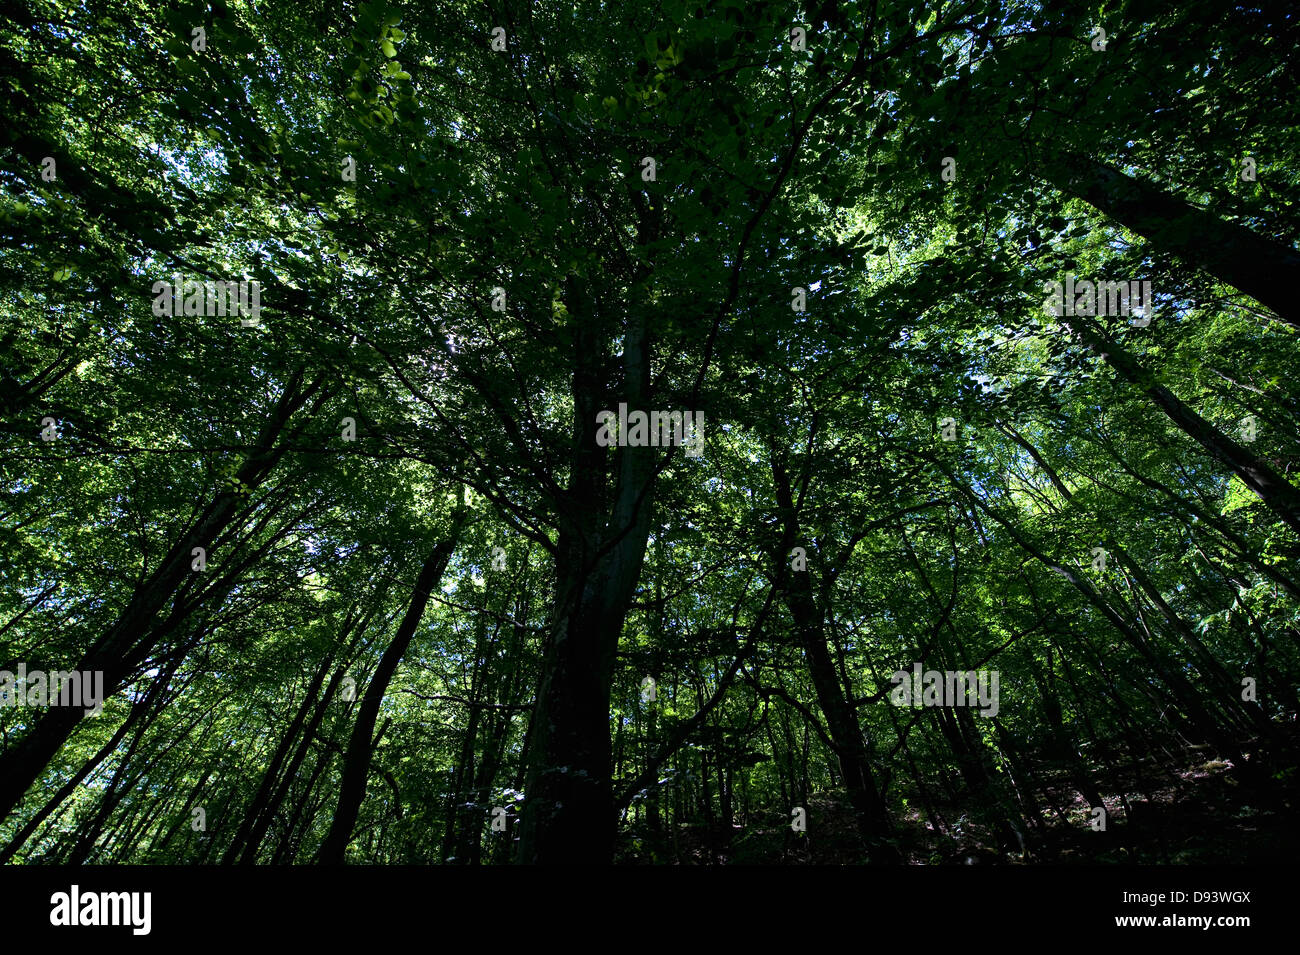 Beech trees in forest, low angle view Stock Photo